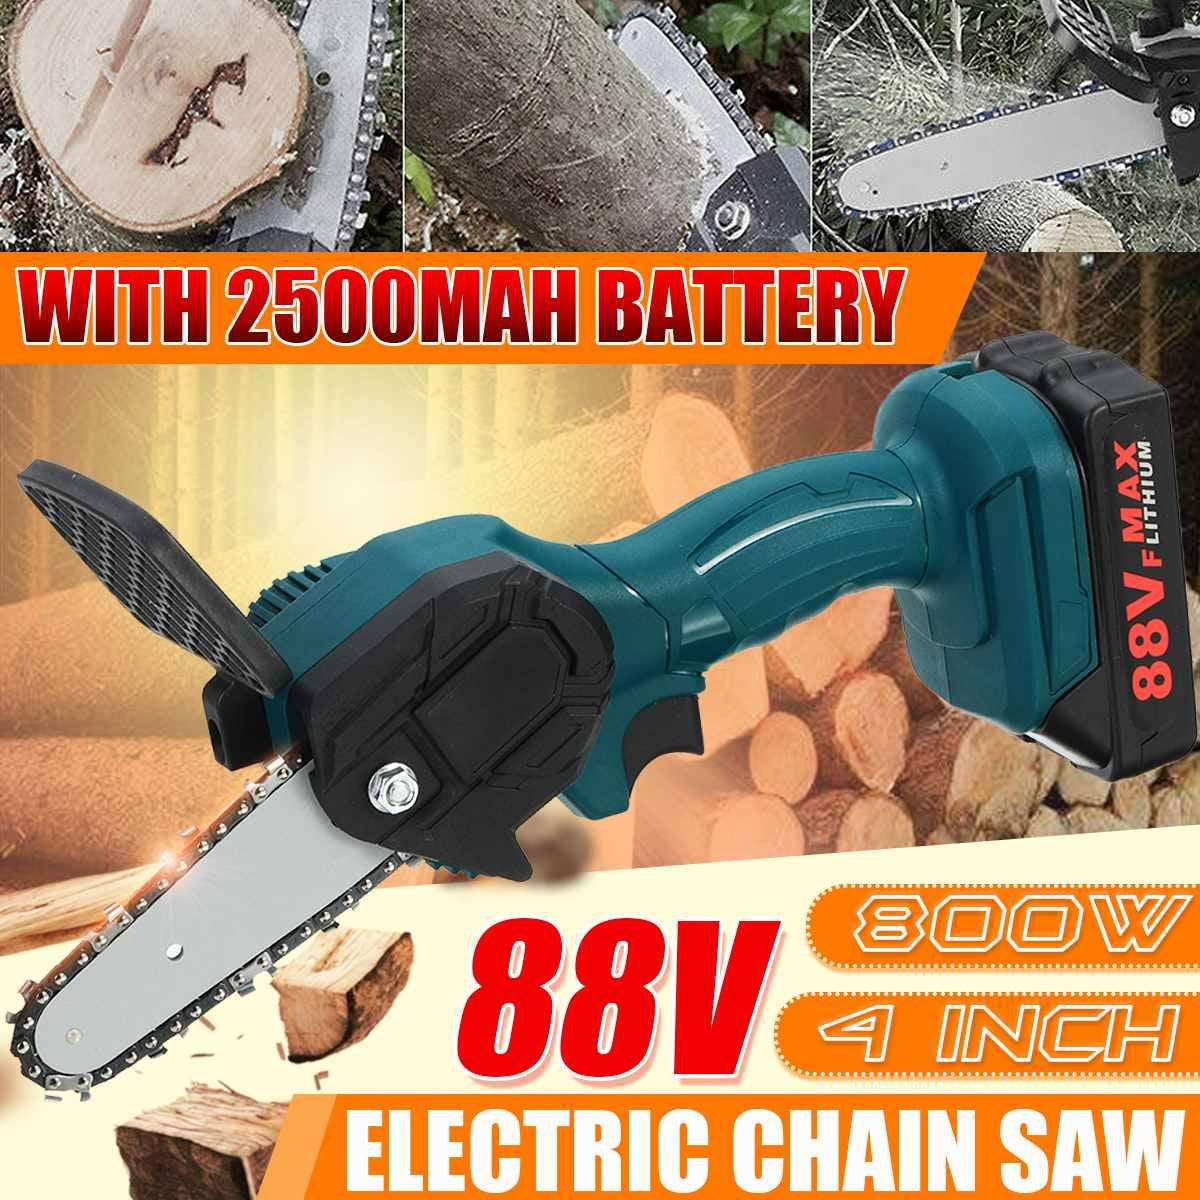 Electric Chainsaw_Mini Chainsaw_Electric Saw_Cordless Mini Chainsaw_Saw for Wood_DIYlife-today